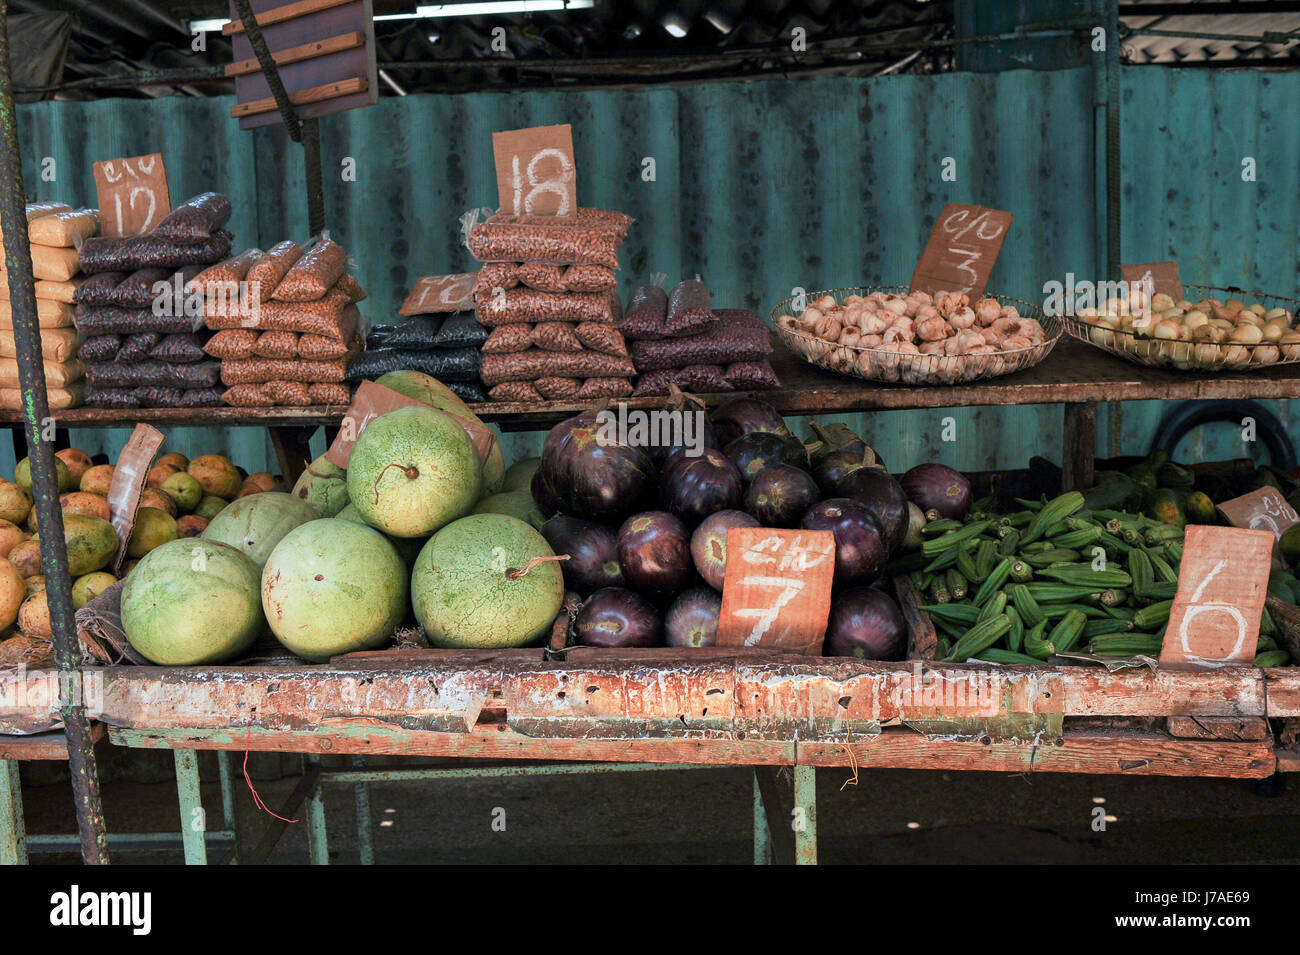 Fruit and vegetables stand at a local market in Neptuno street, Havana, Cuba Stock Photo